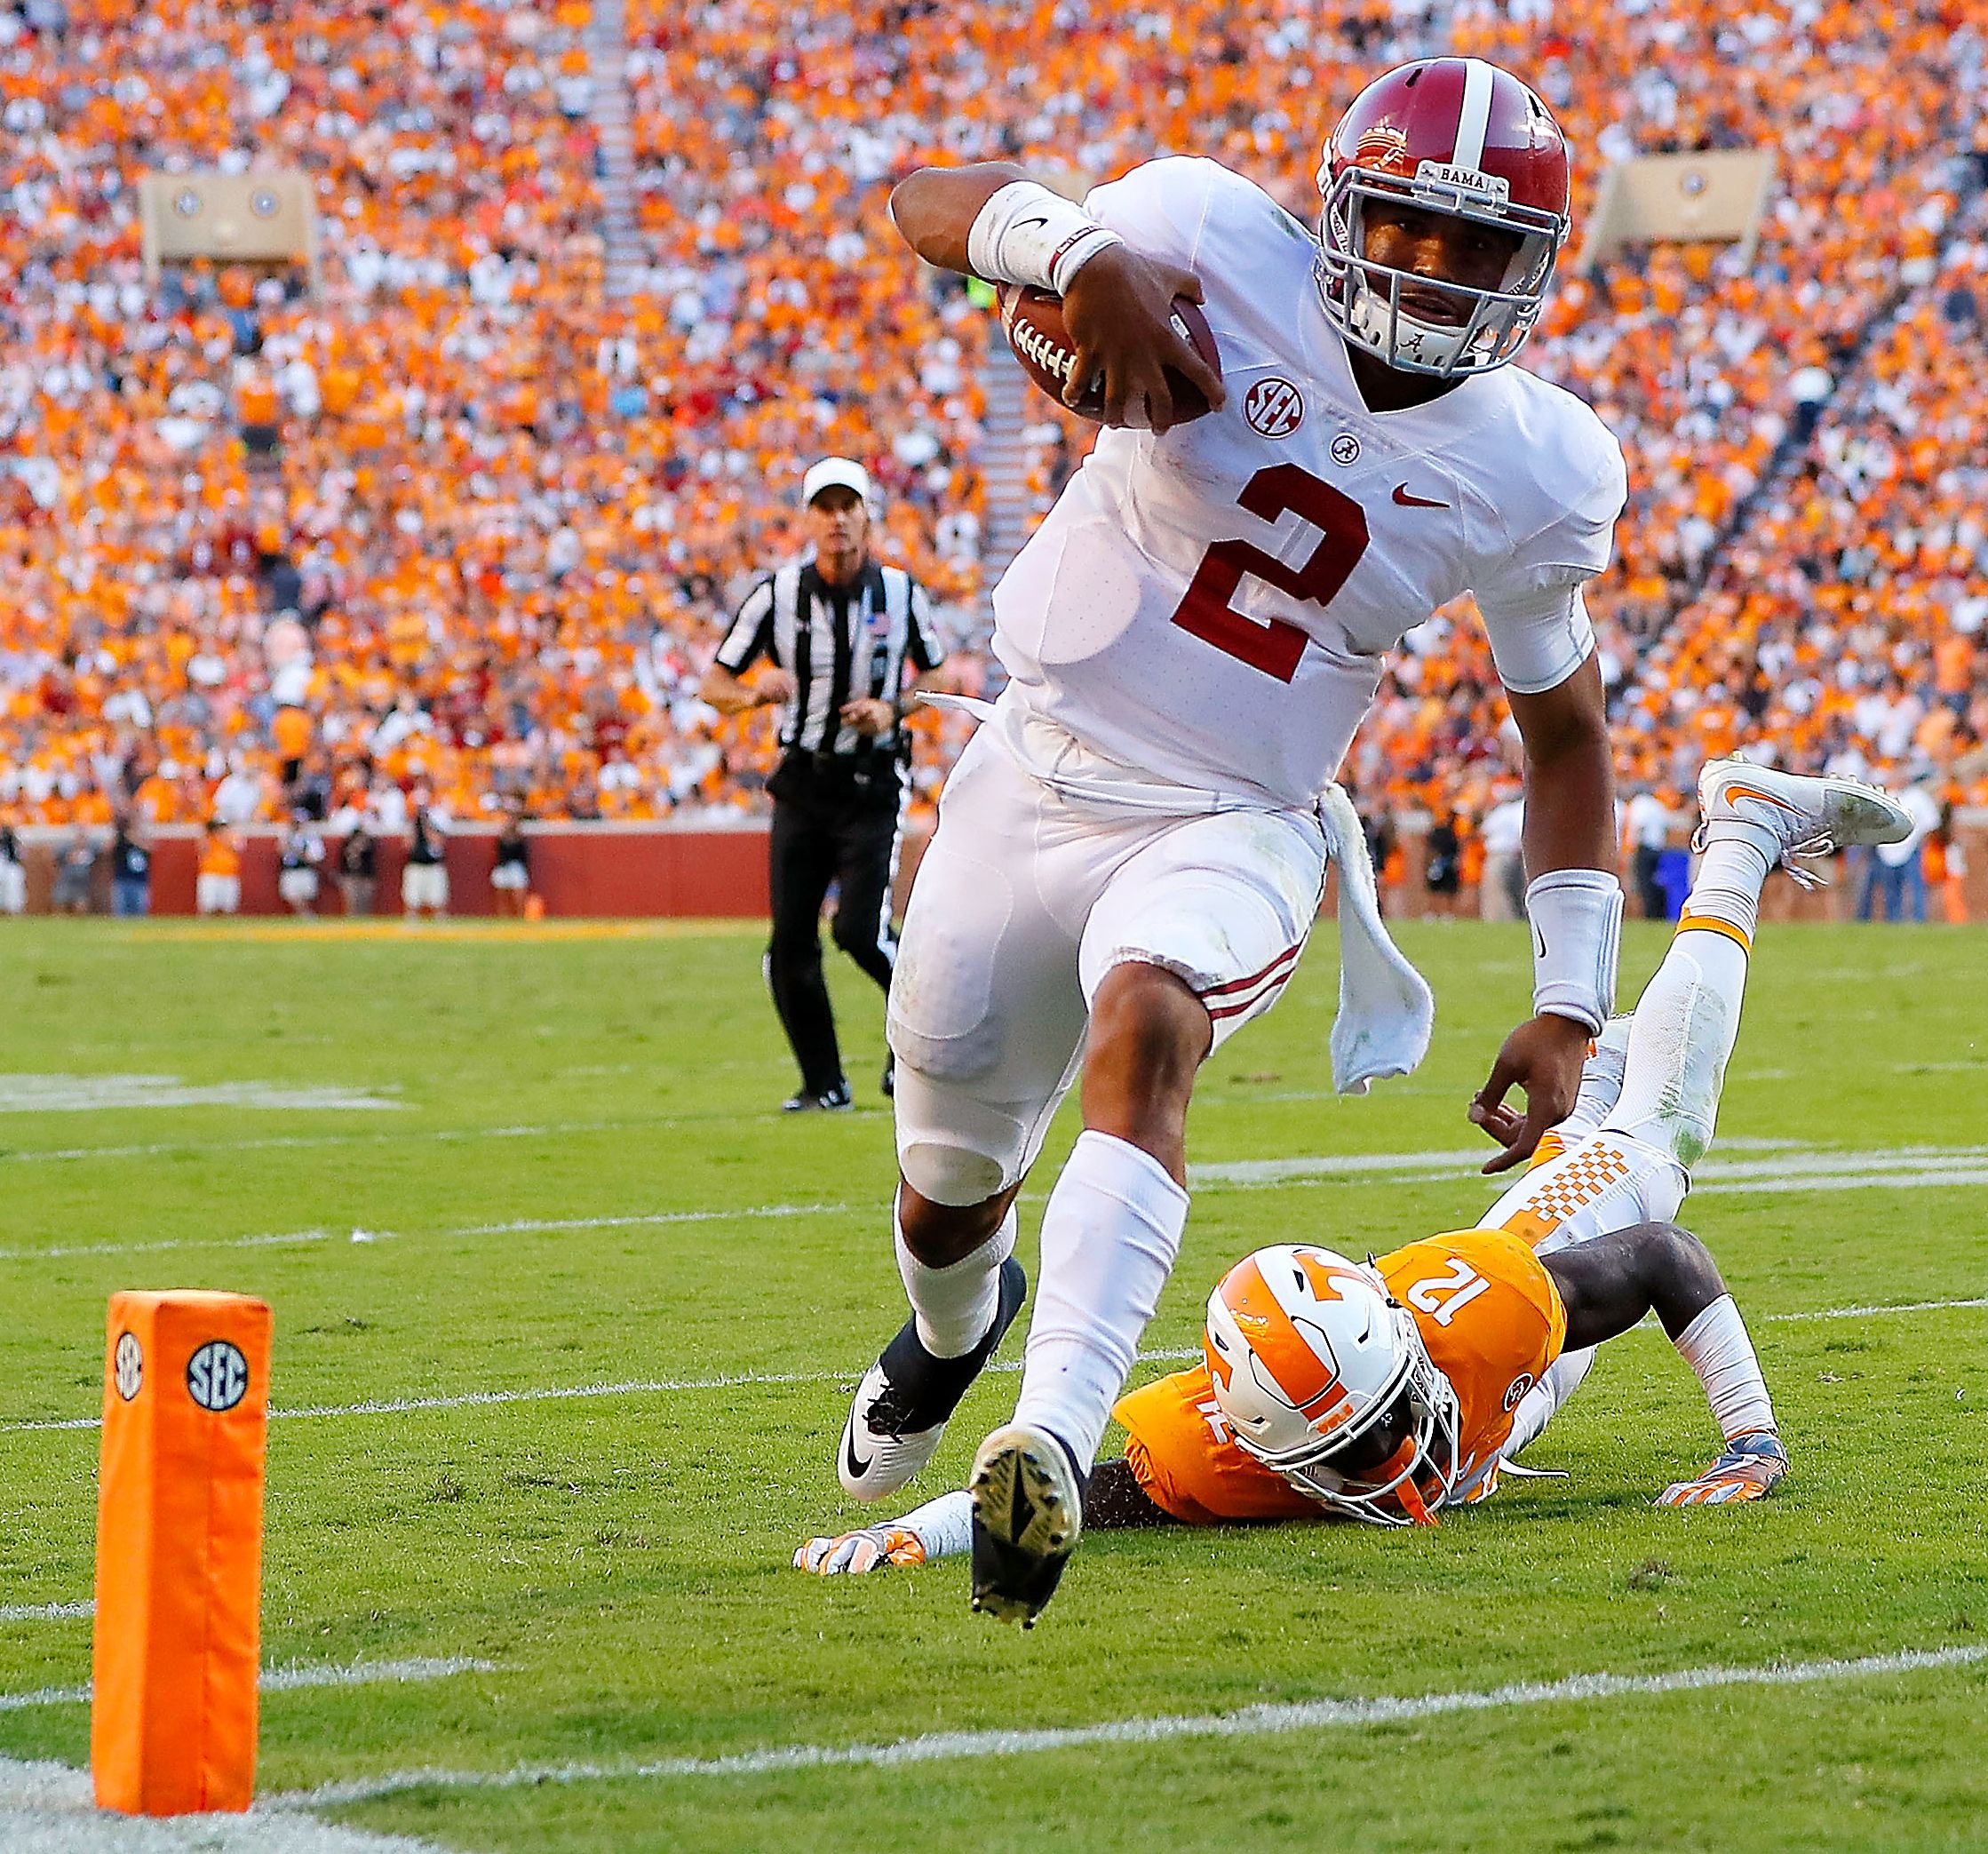 Hurts gashes Tennessee on the ground Photos Alabama vs. Tennessee ESPN